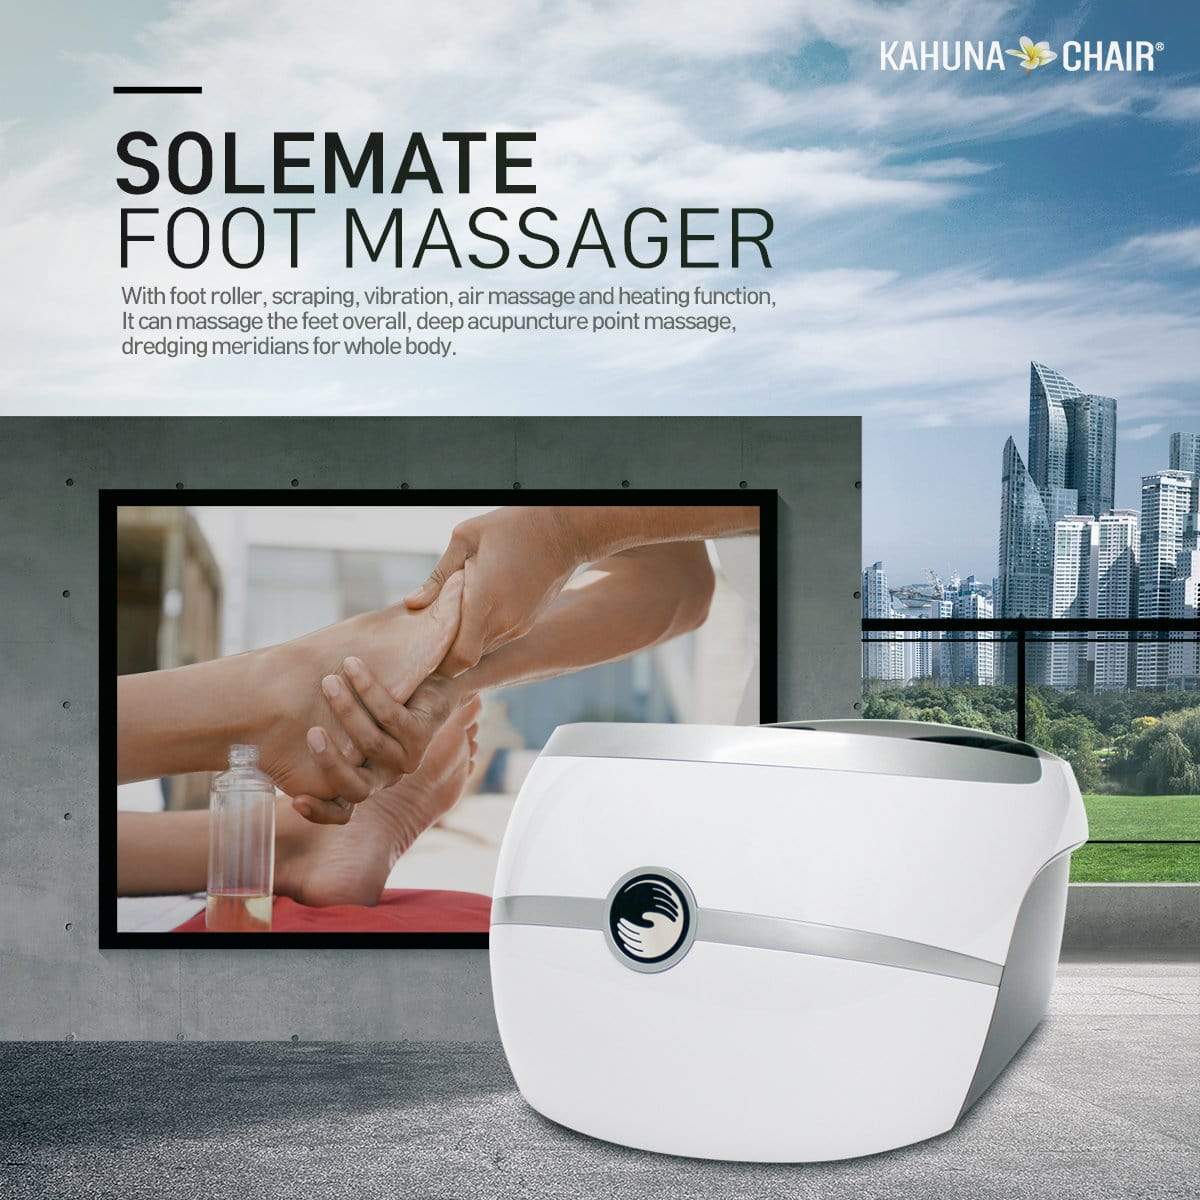 Ace Massage Chairs Kahuna Foot Massager -Solemate Foot - Sole Mate